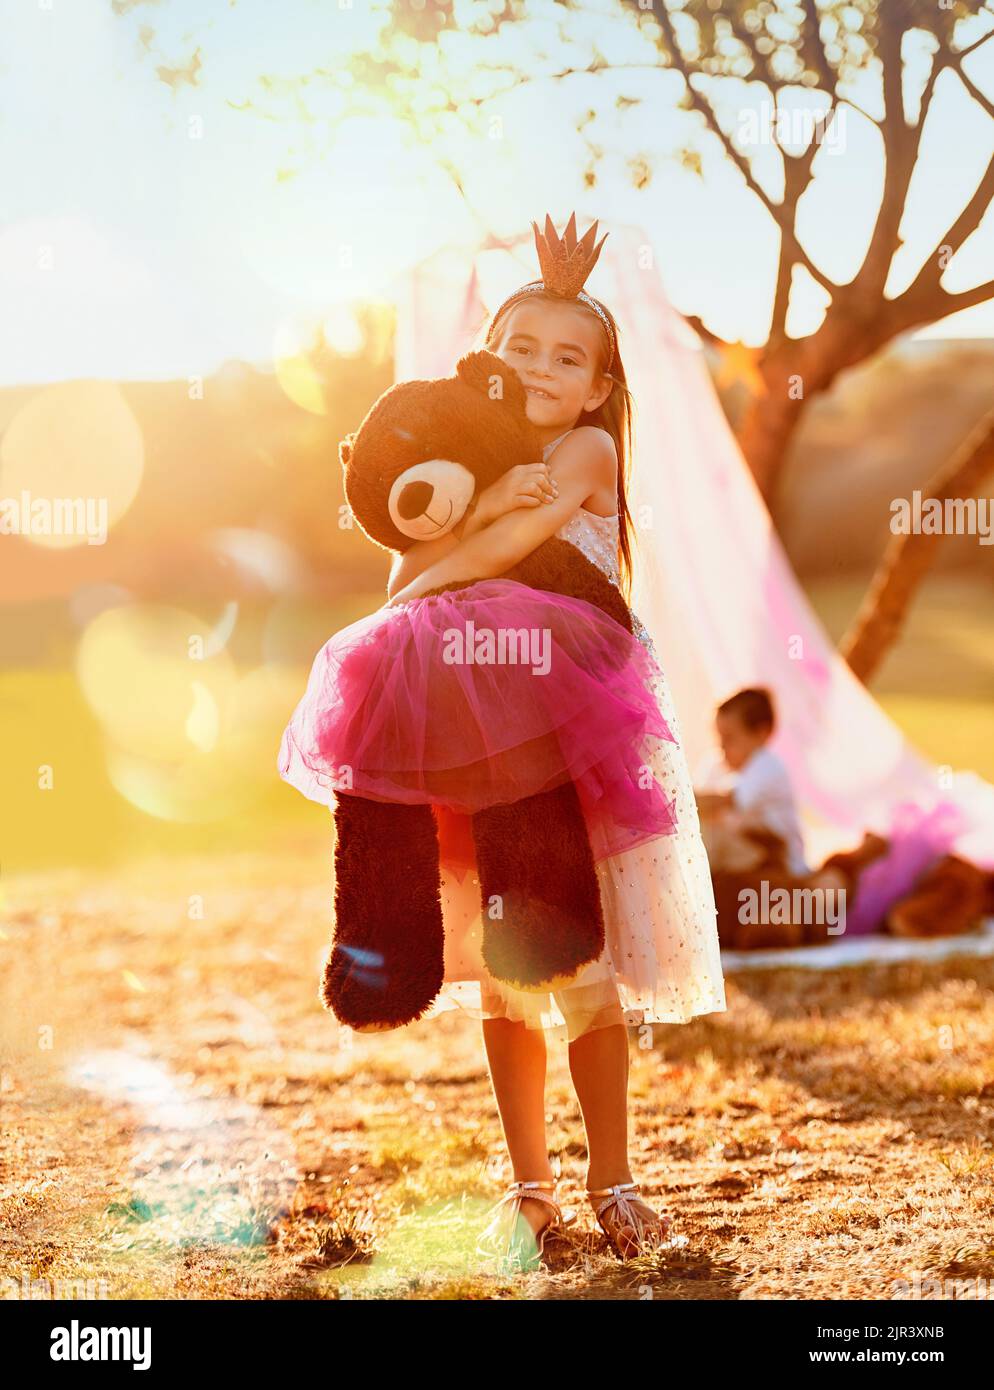 This is the imagination nation. an adorable little girl playing with her teddybear outdoors. Stock Photo